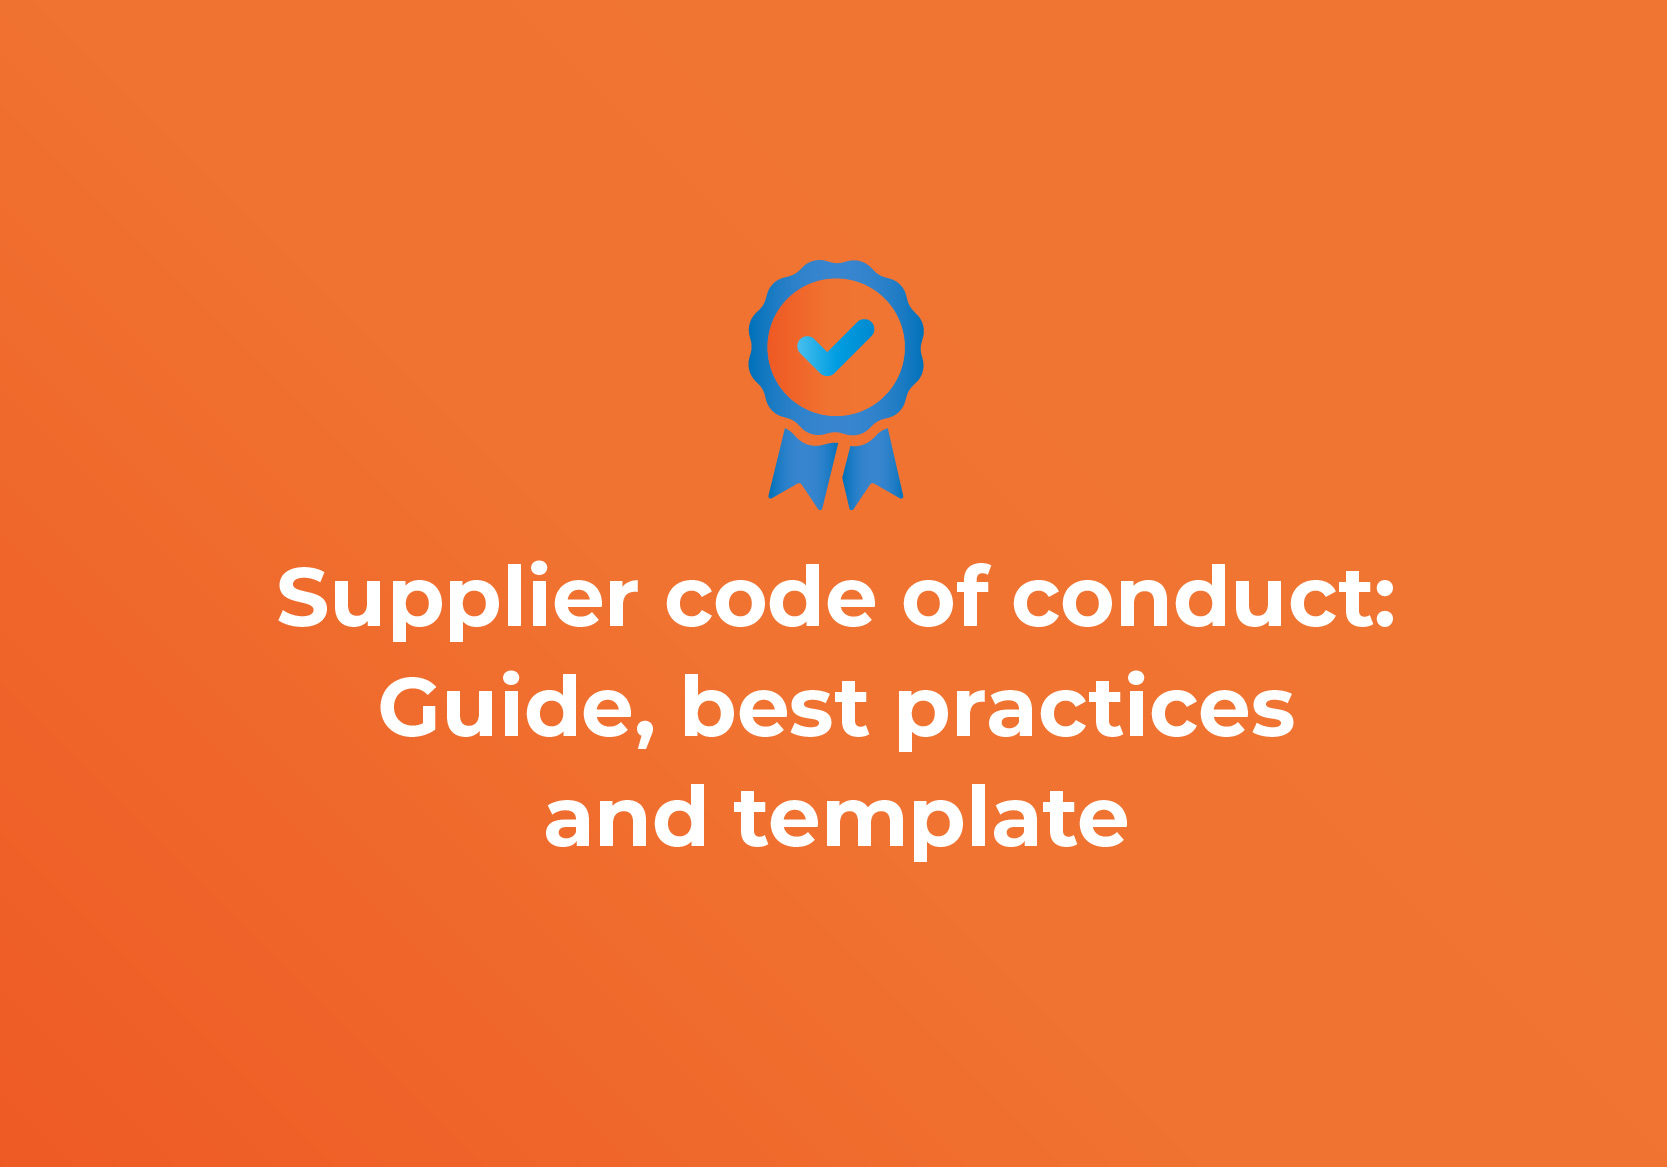 Supplier code of conduct- Guide, best practices and template-RFP360